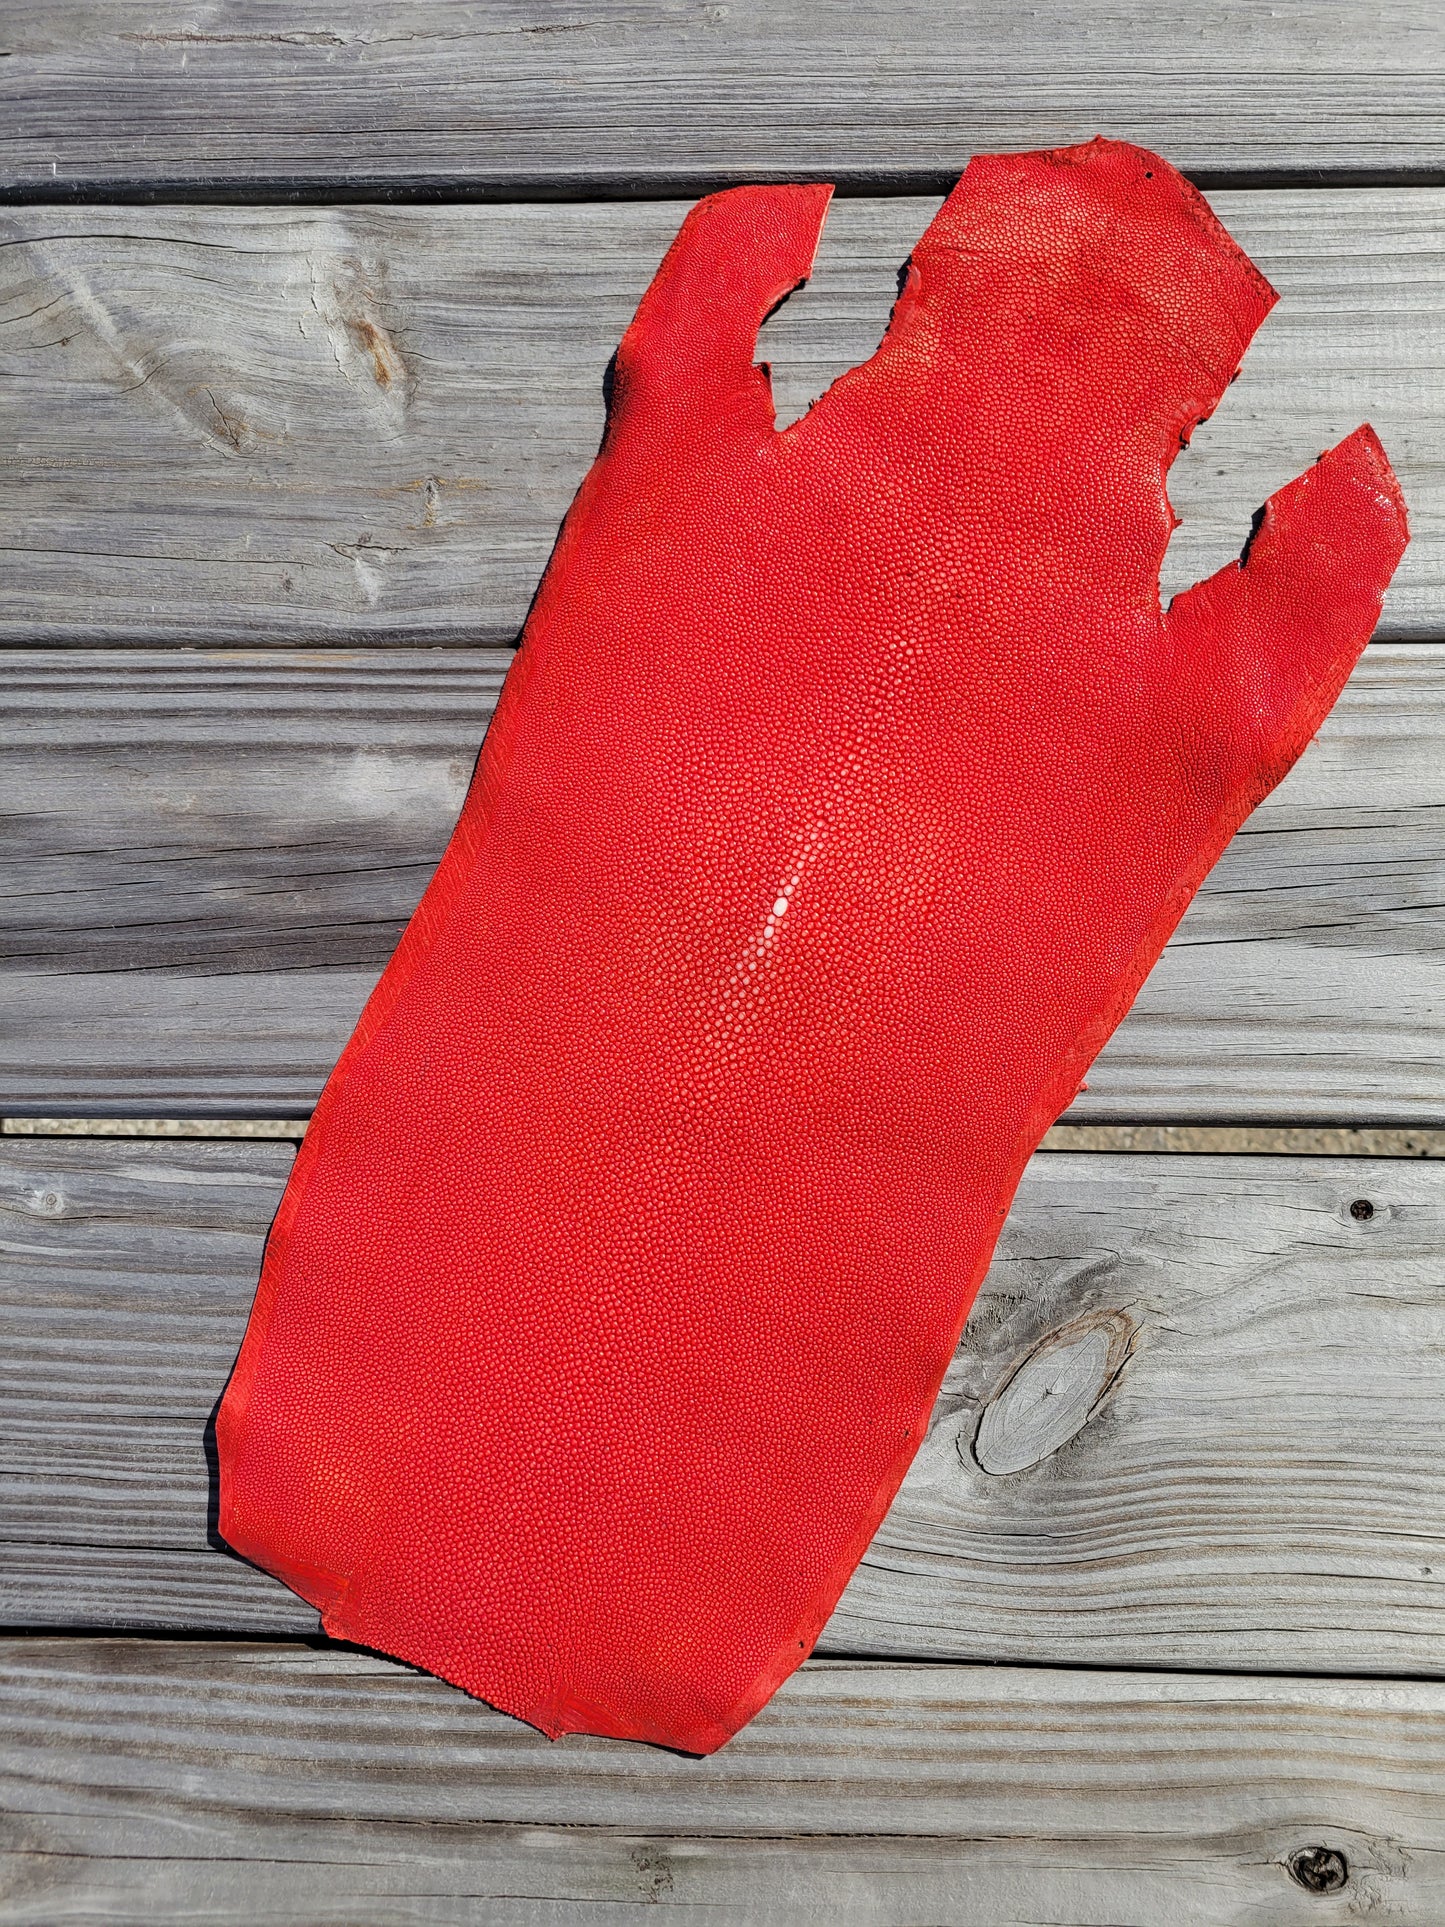 Stingray Leather - Coral Red Polished